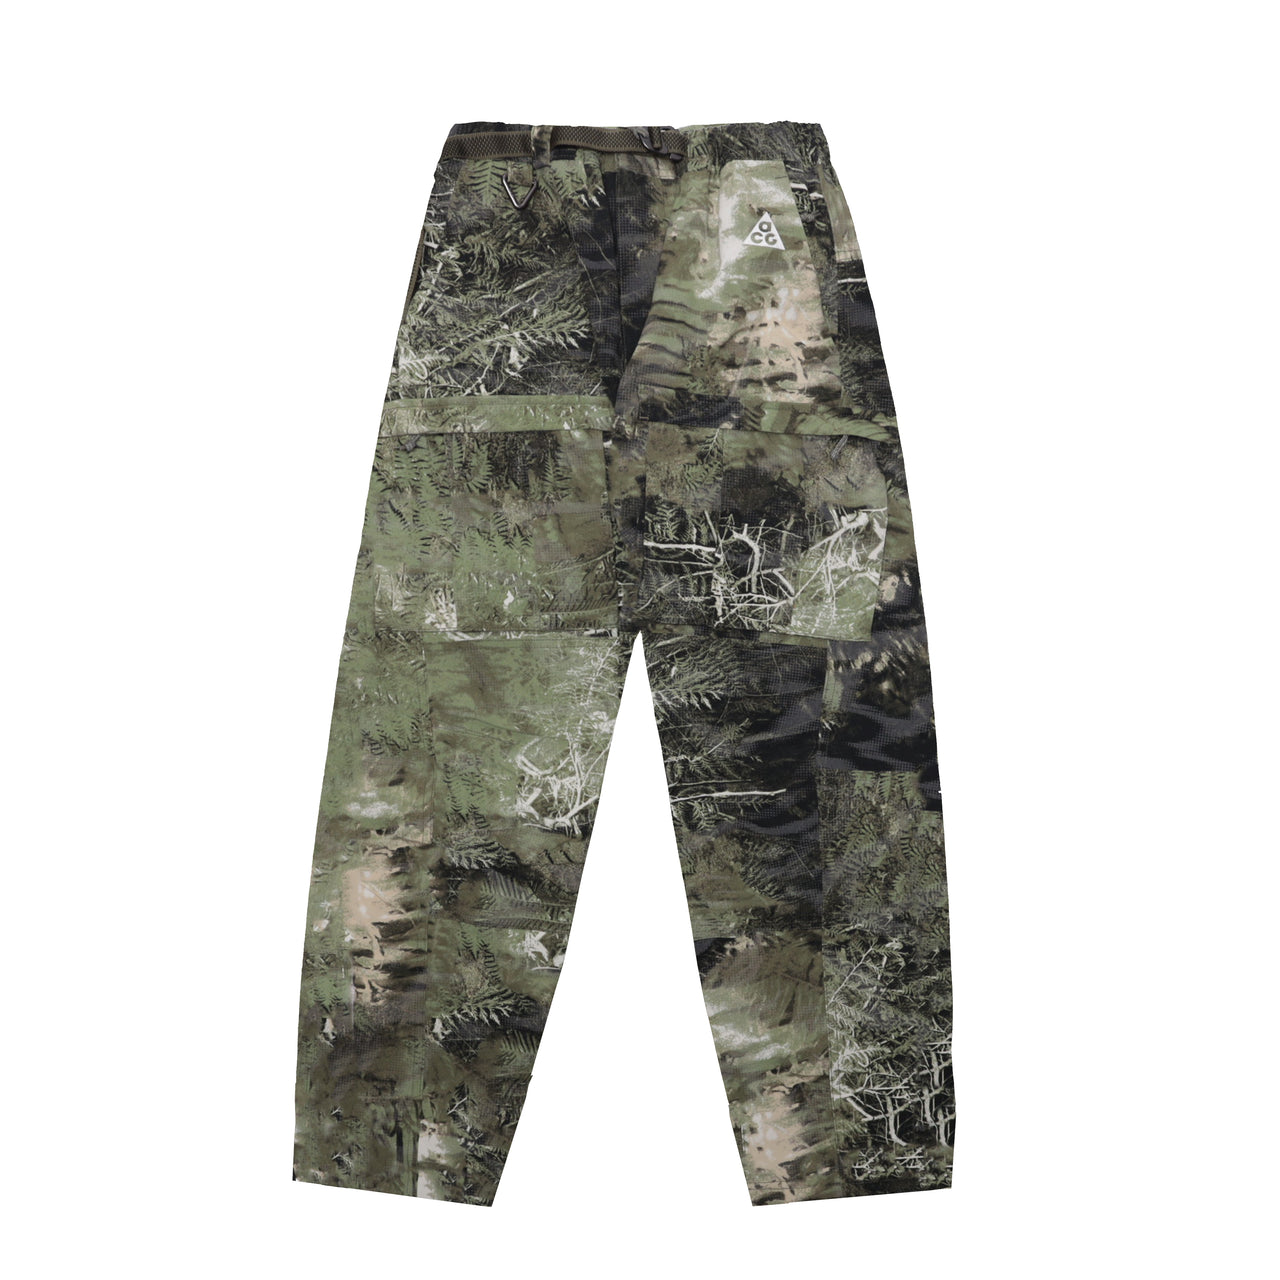 M ACG "SMITH SUMMIT" ALL OVER PRINT CARGO PANTS